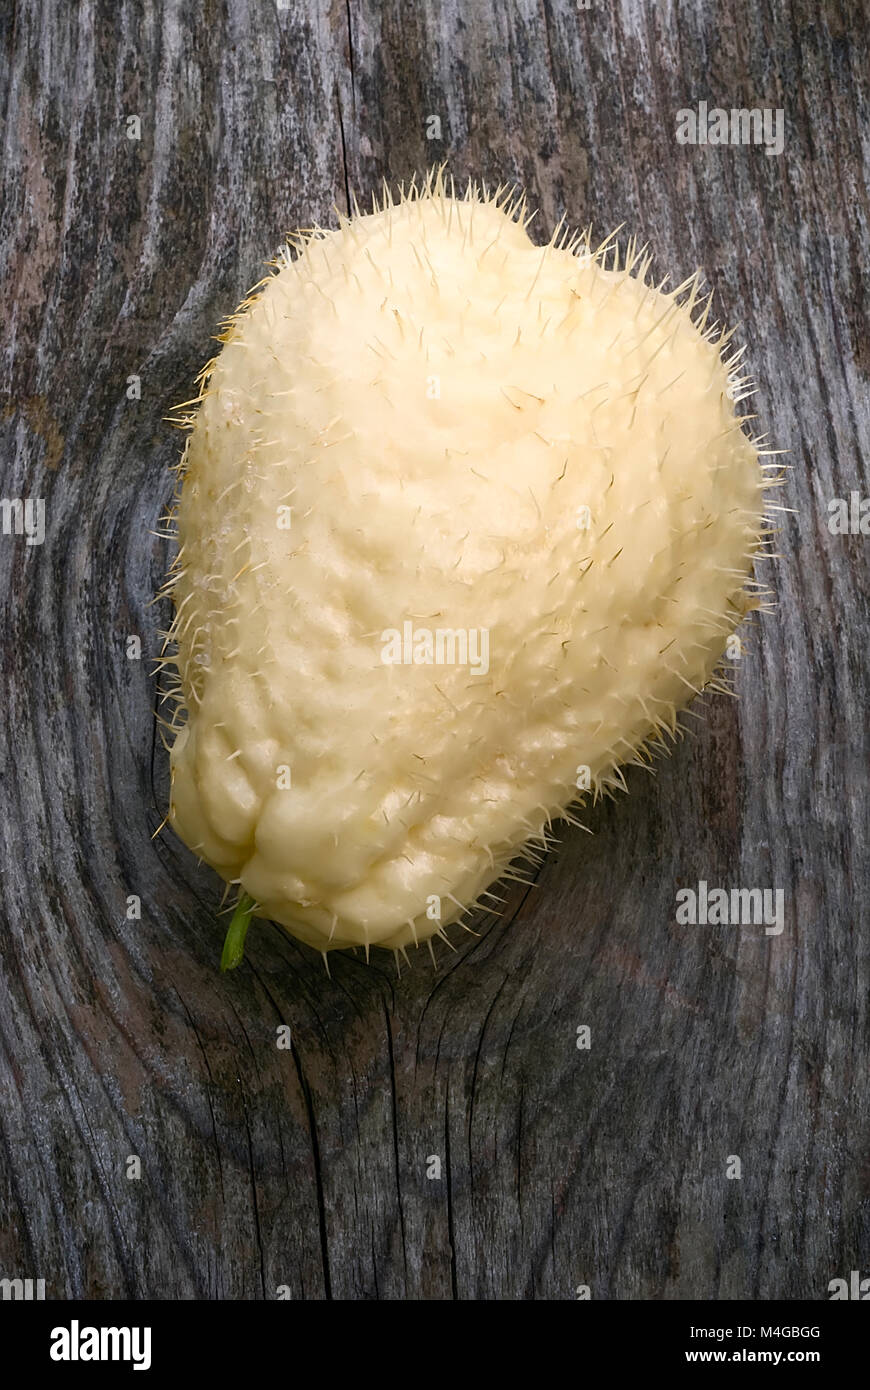 The chayote (Sechium edule), fruit varieties thorny. Vegetable native to south america. Stock Photo